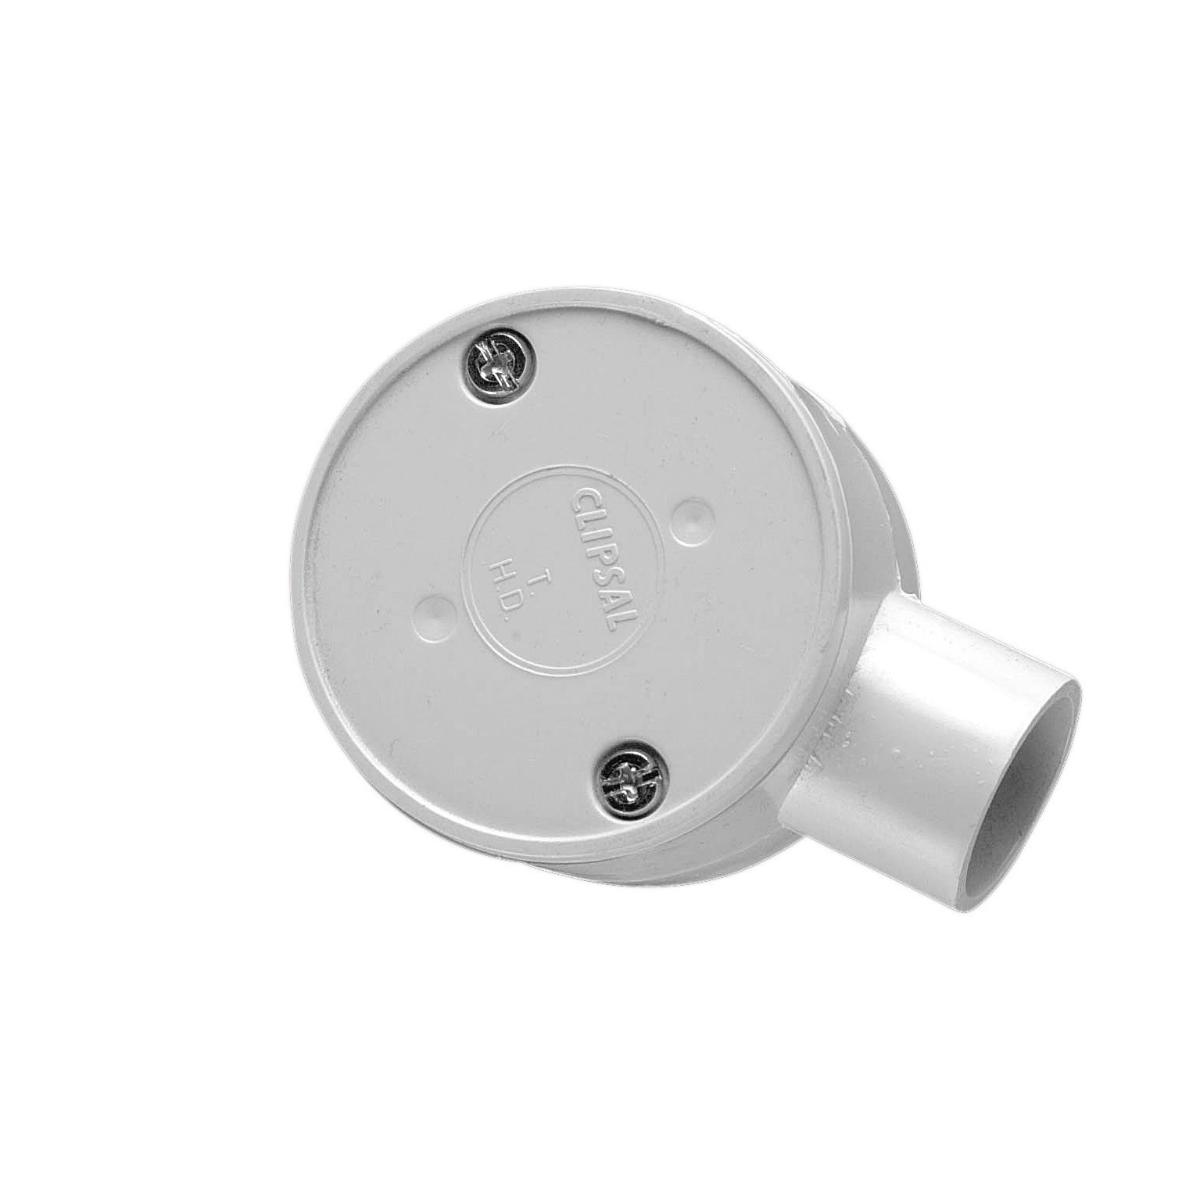 JUNCTION BOX ROUND SHALLOW PVC 25MM 1WAY